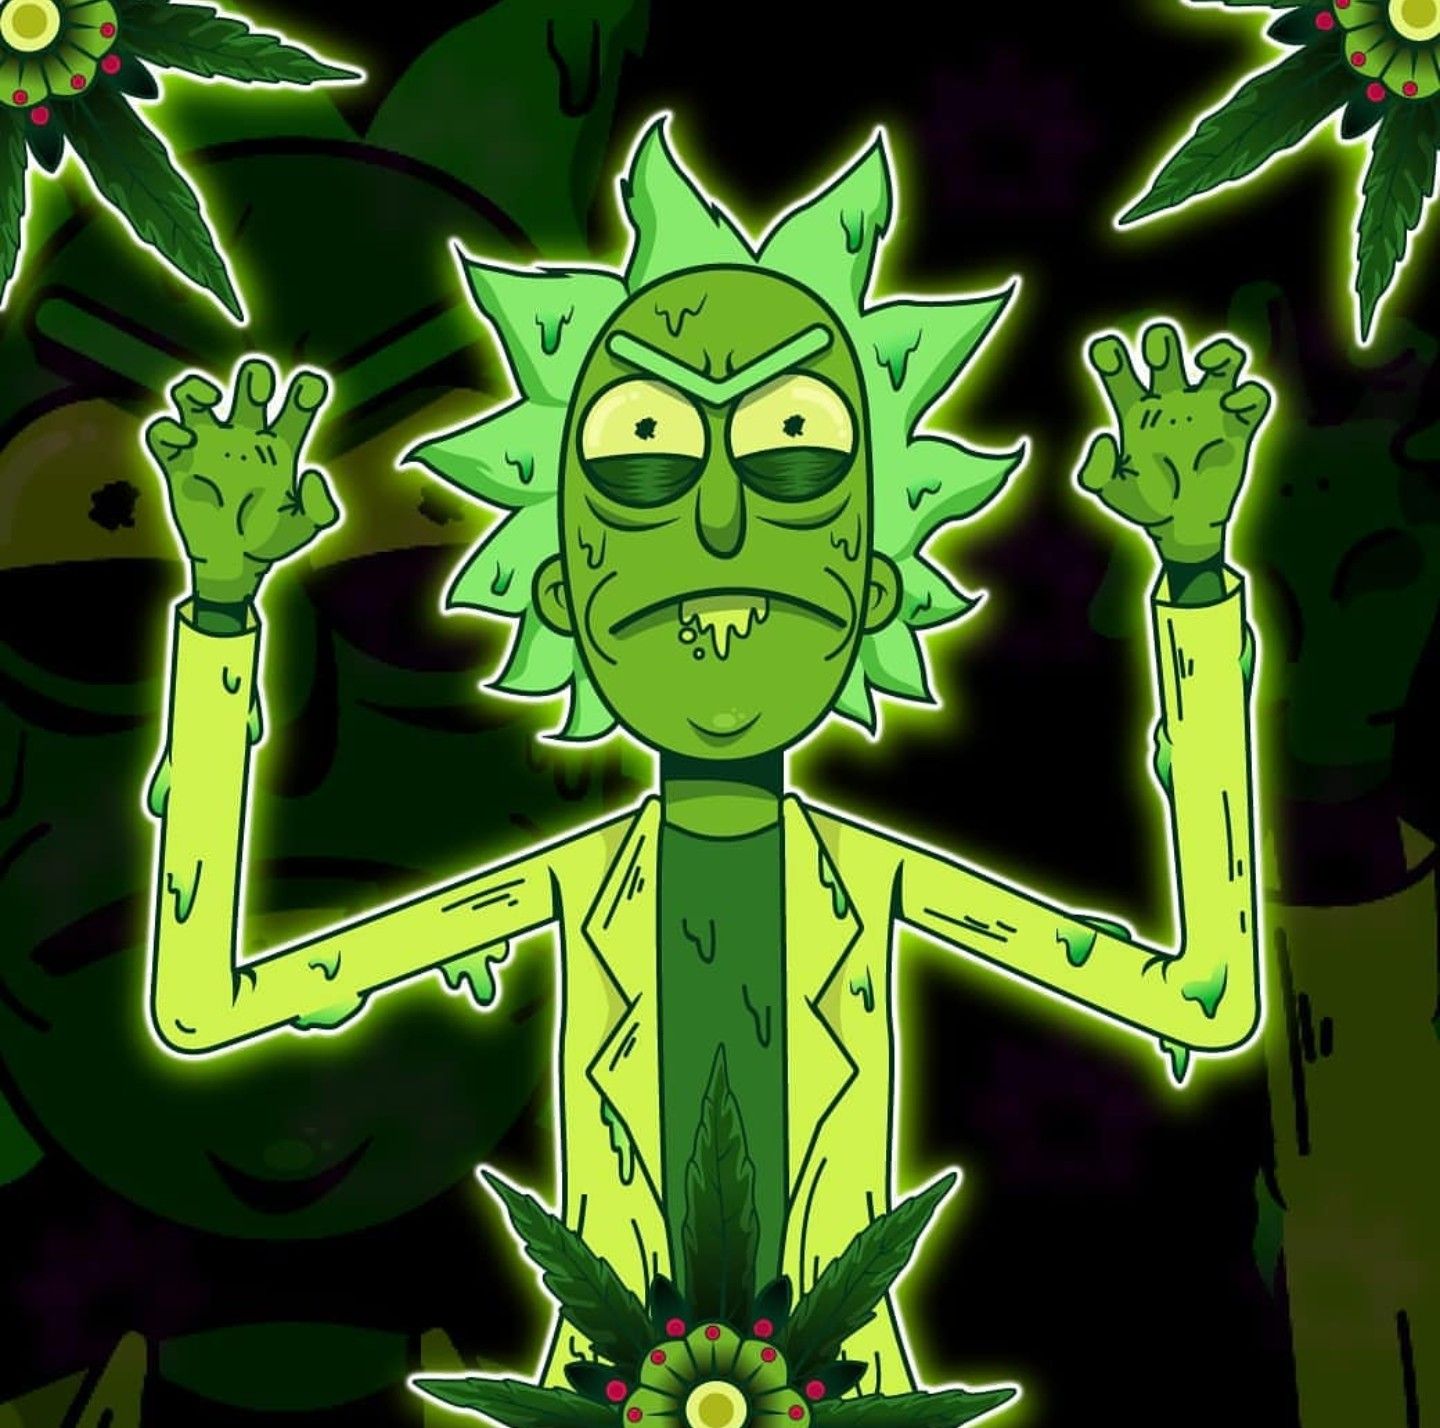 Rick and Morty Peace Among Words iPhone Wallpaper | Rick and morty  stickers, Iphone wallpaper rick and morty, Rick and morty tattoo